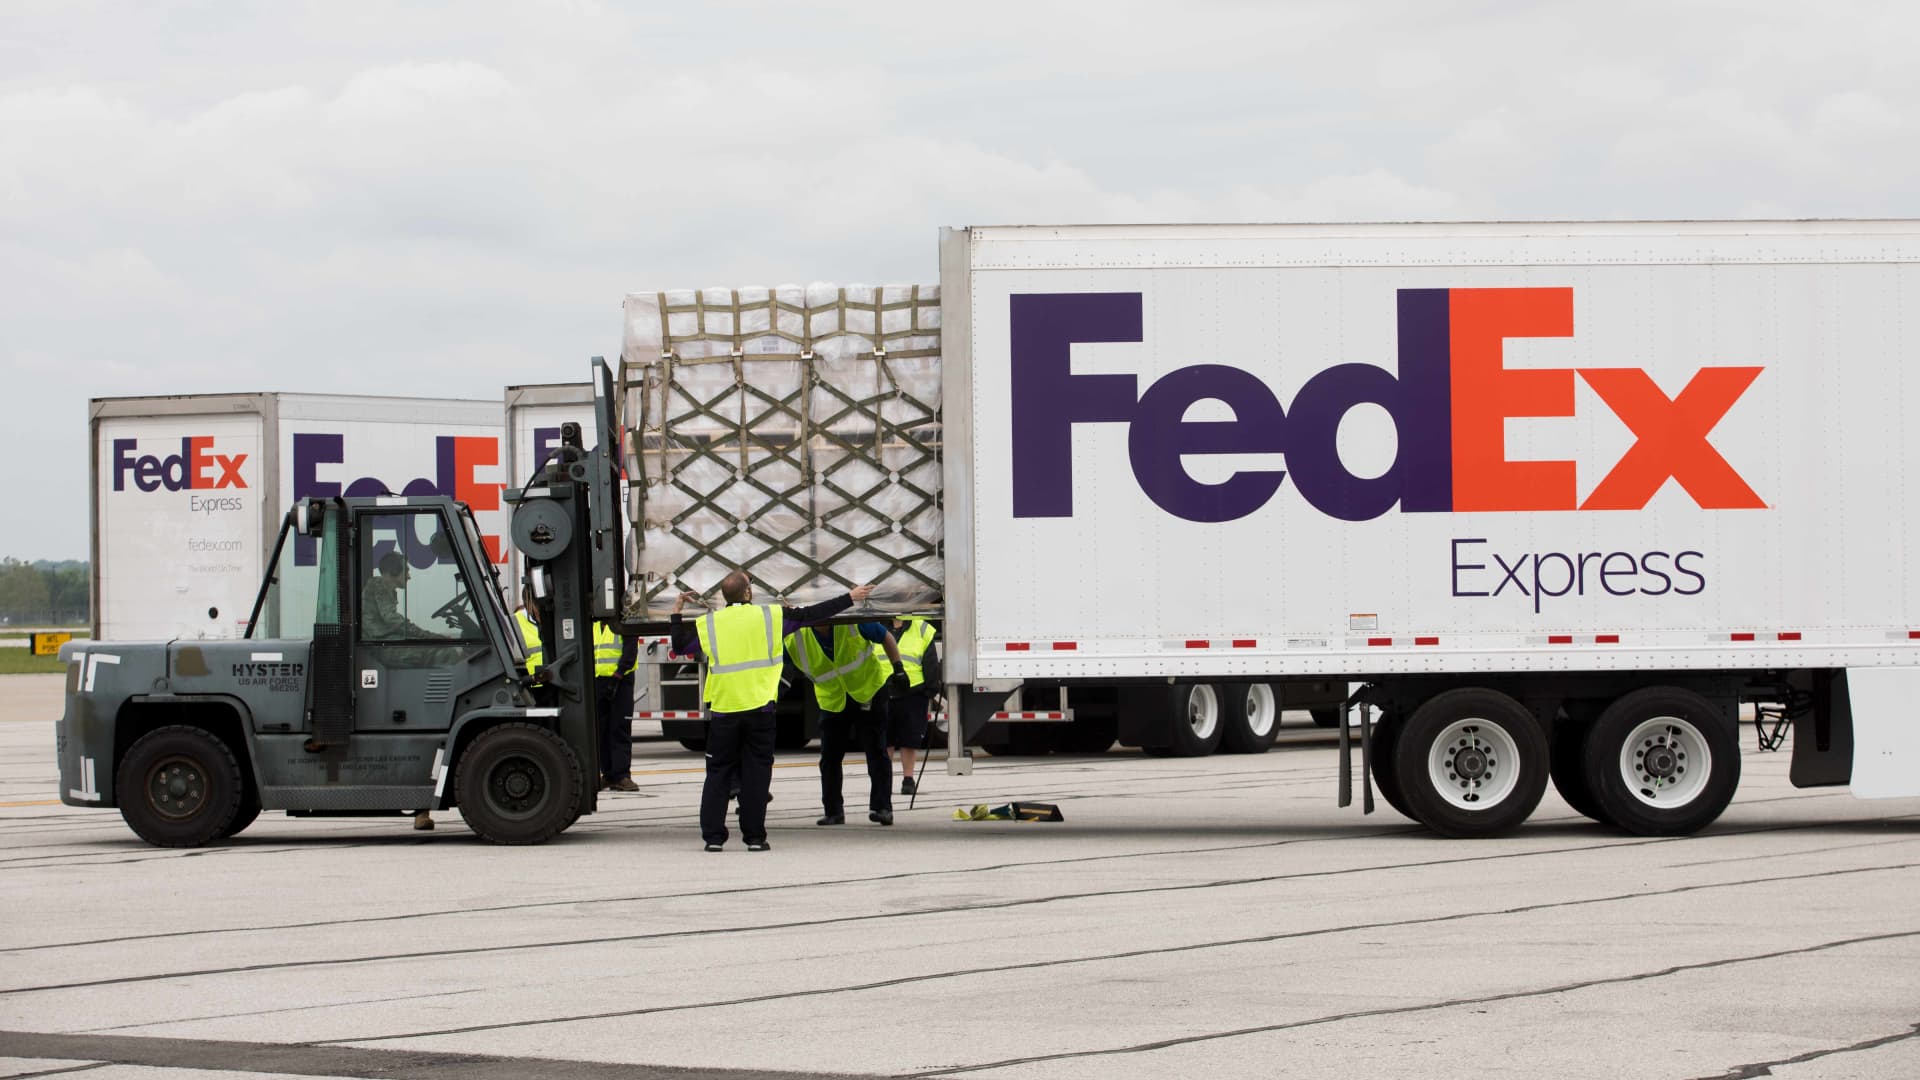 Stocks making the biggest moves midday: Alibaba, FedEx, Bed Bath & Beyond and more